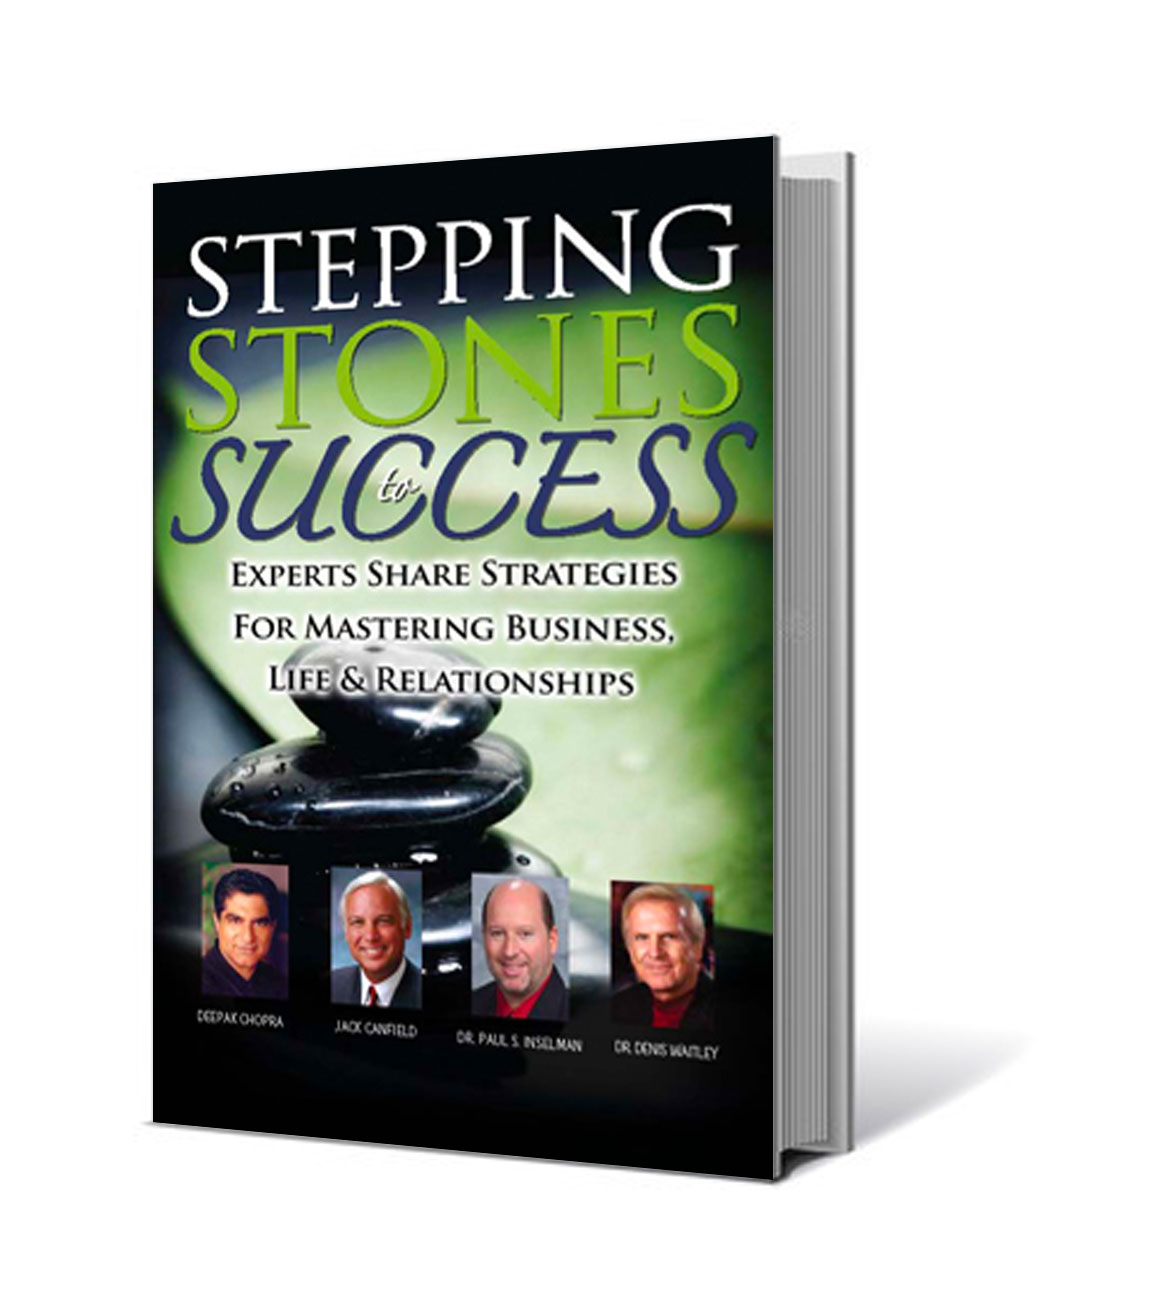 STEPPING STONES TO SUCCESS